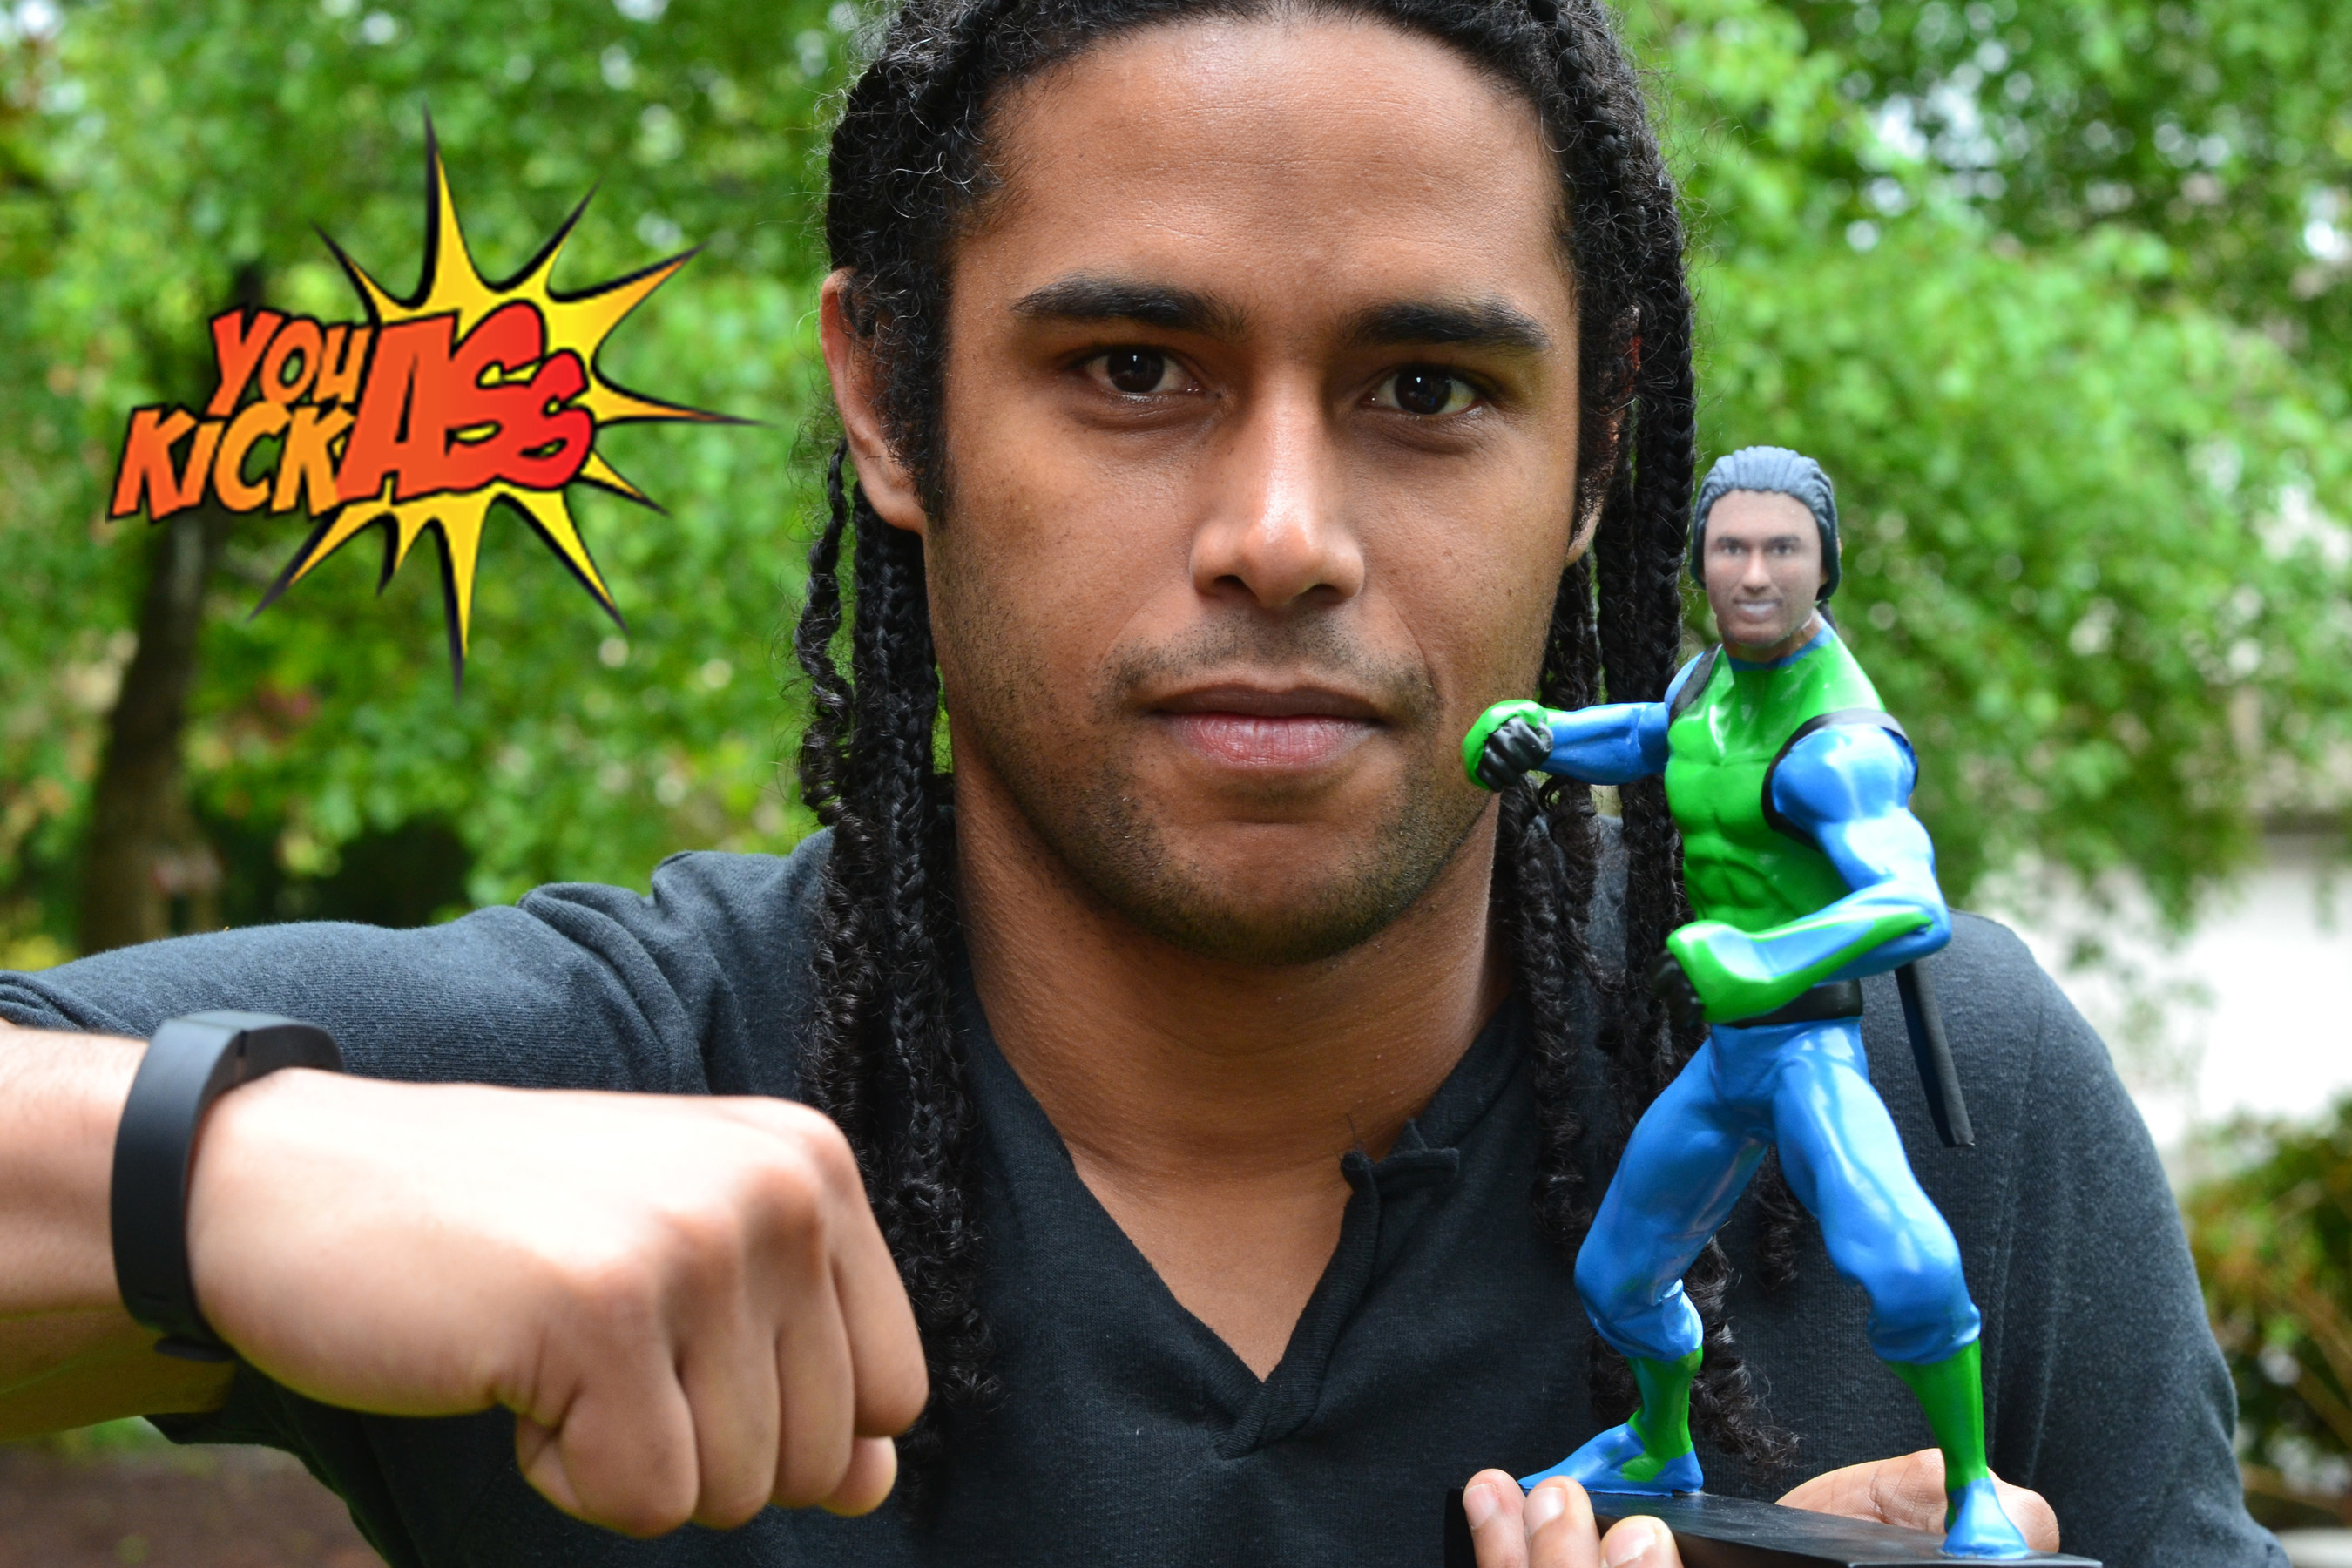 Through the magic and advancements in 3D printing, highly customized YOU KICK ASS action figures are now available for the hero in your life!